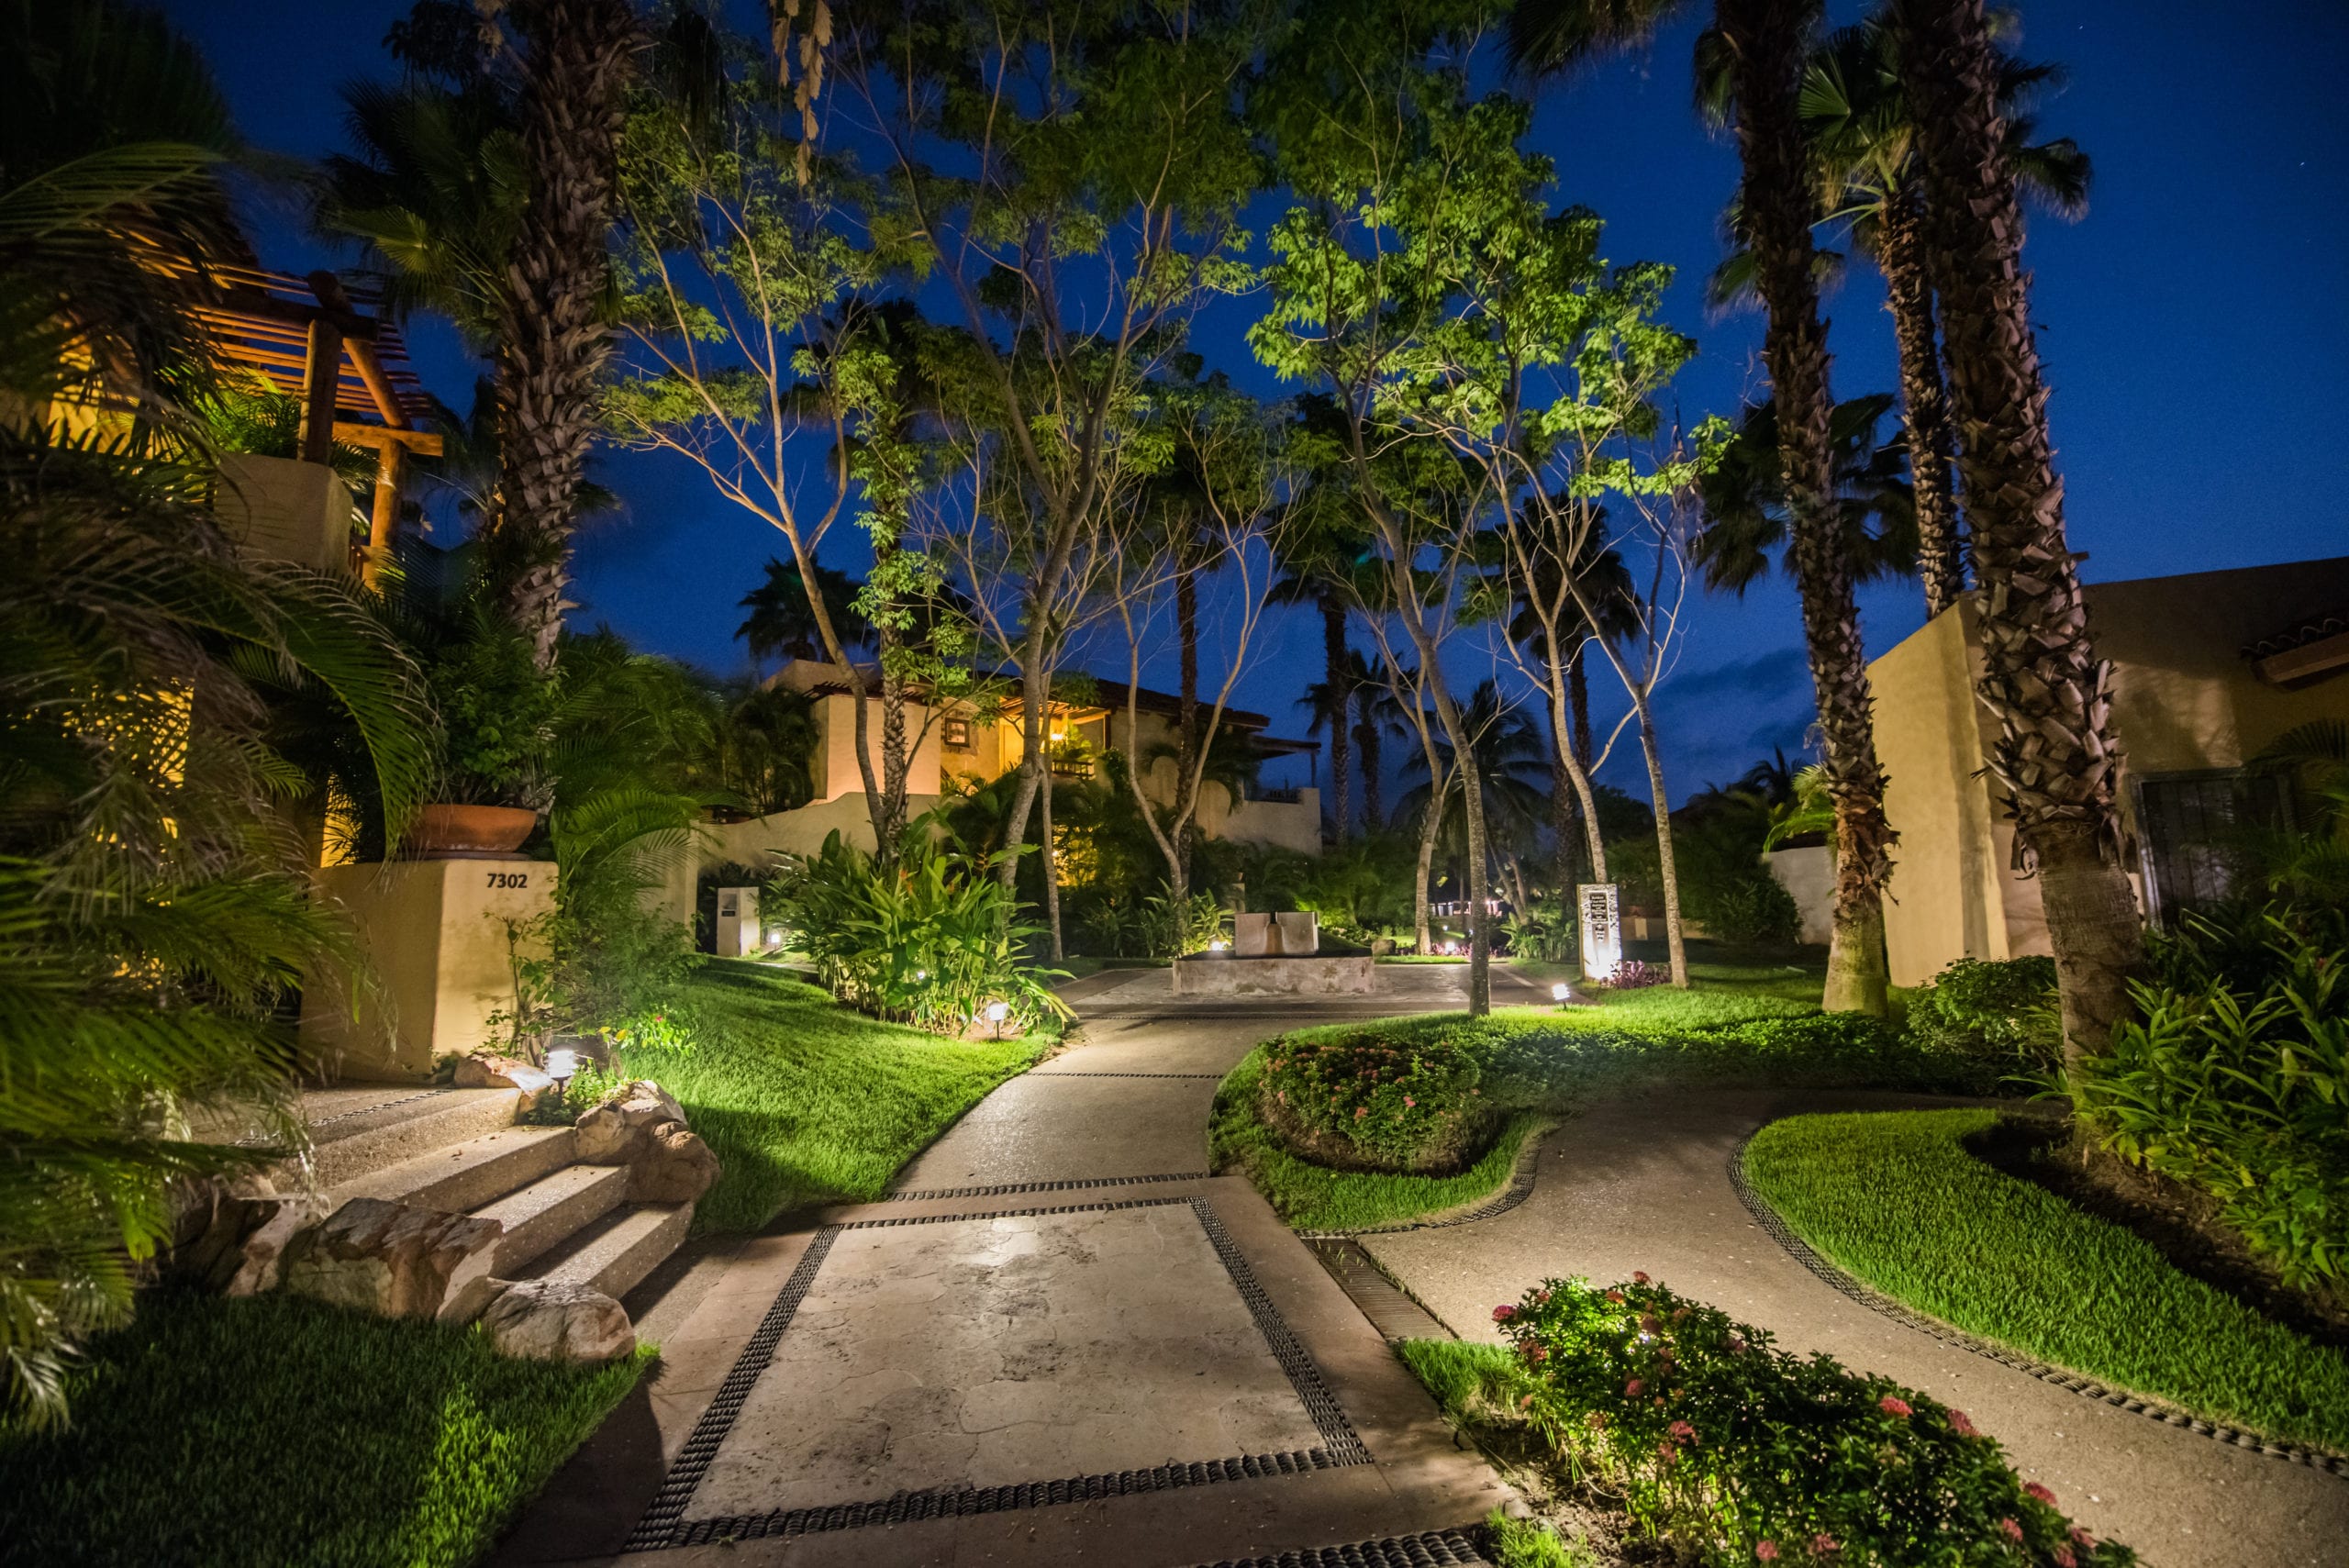 St Regis Walkway with buildings, green foliage, trees and palm trees lit up at night